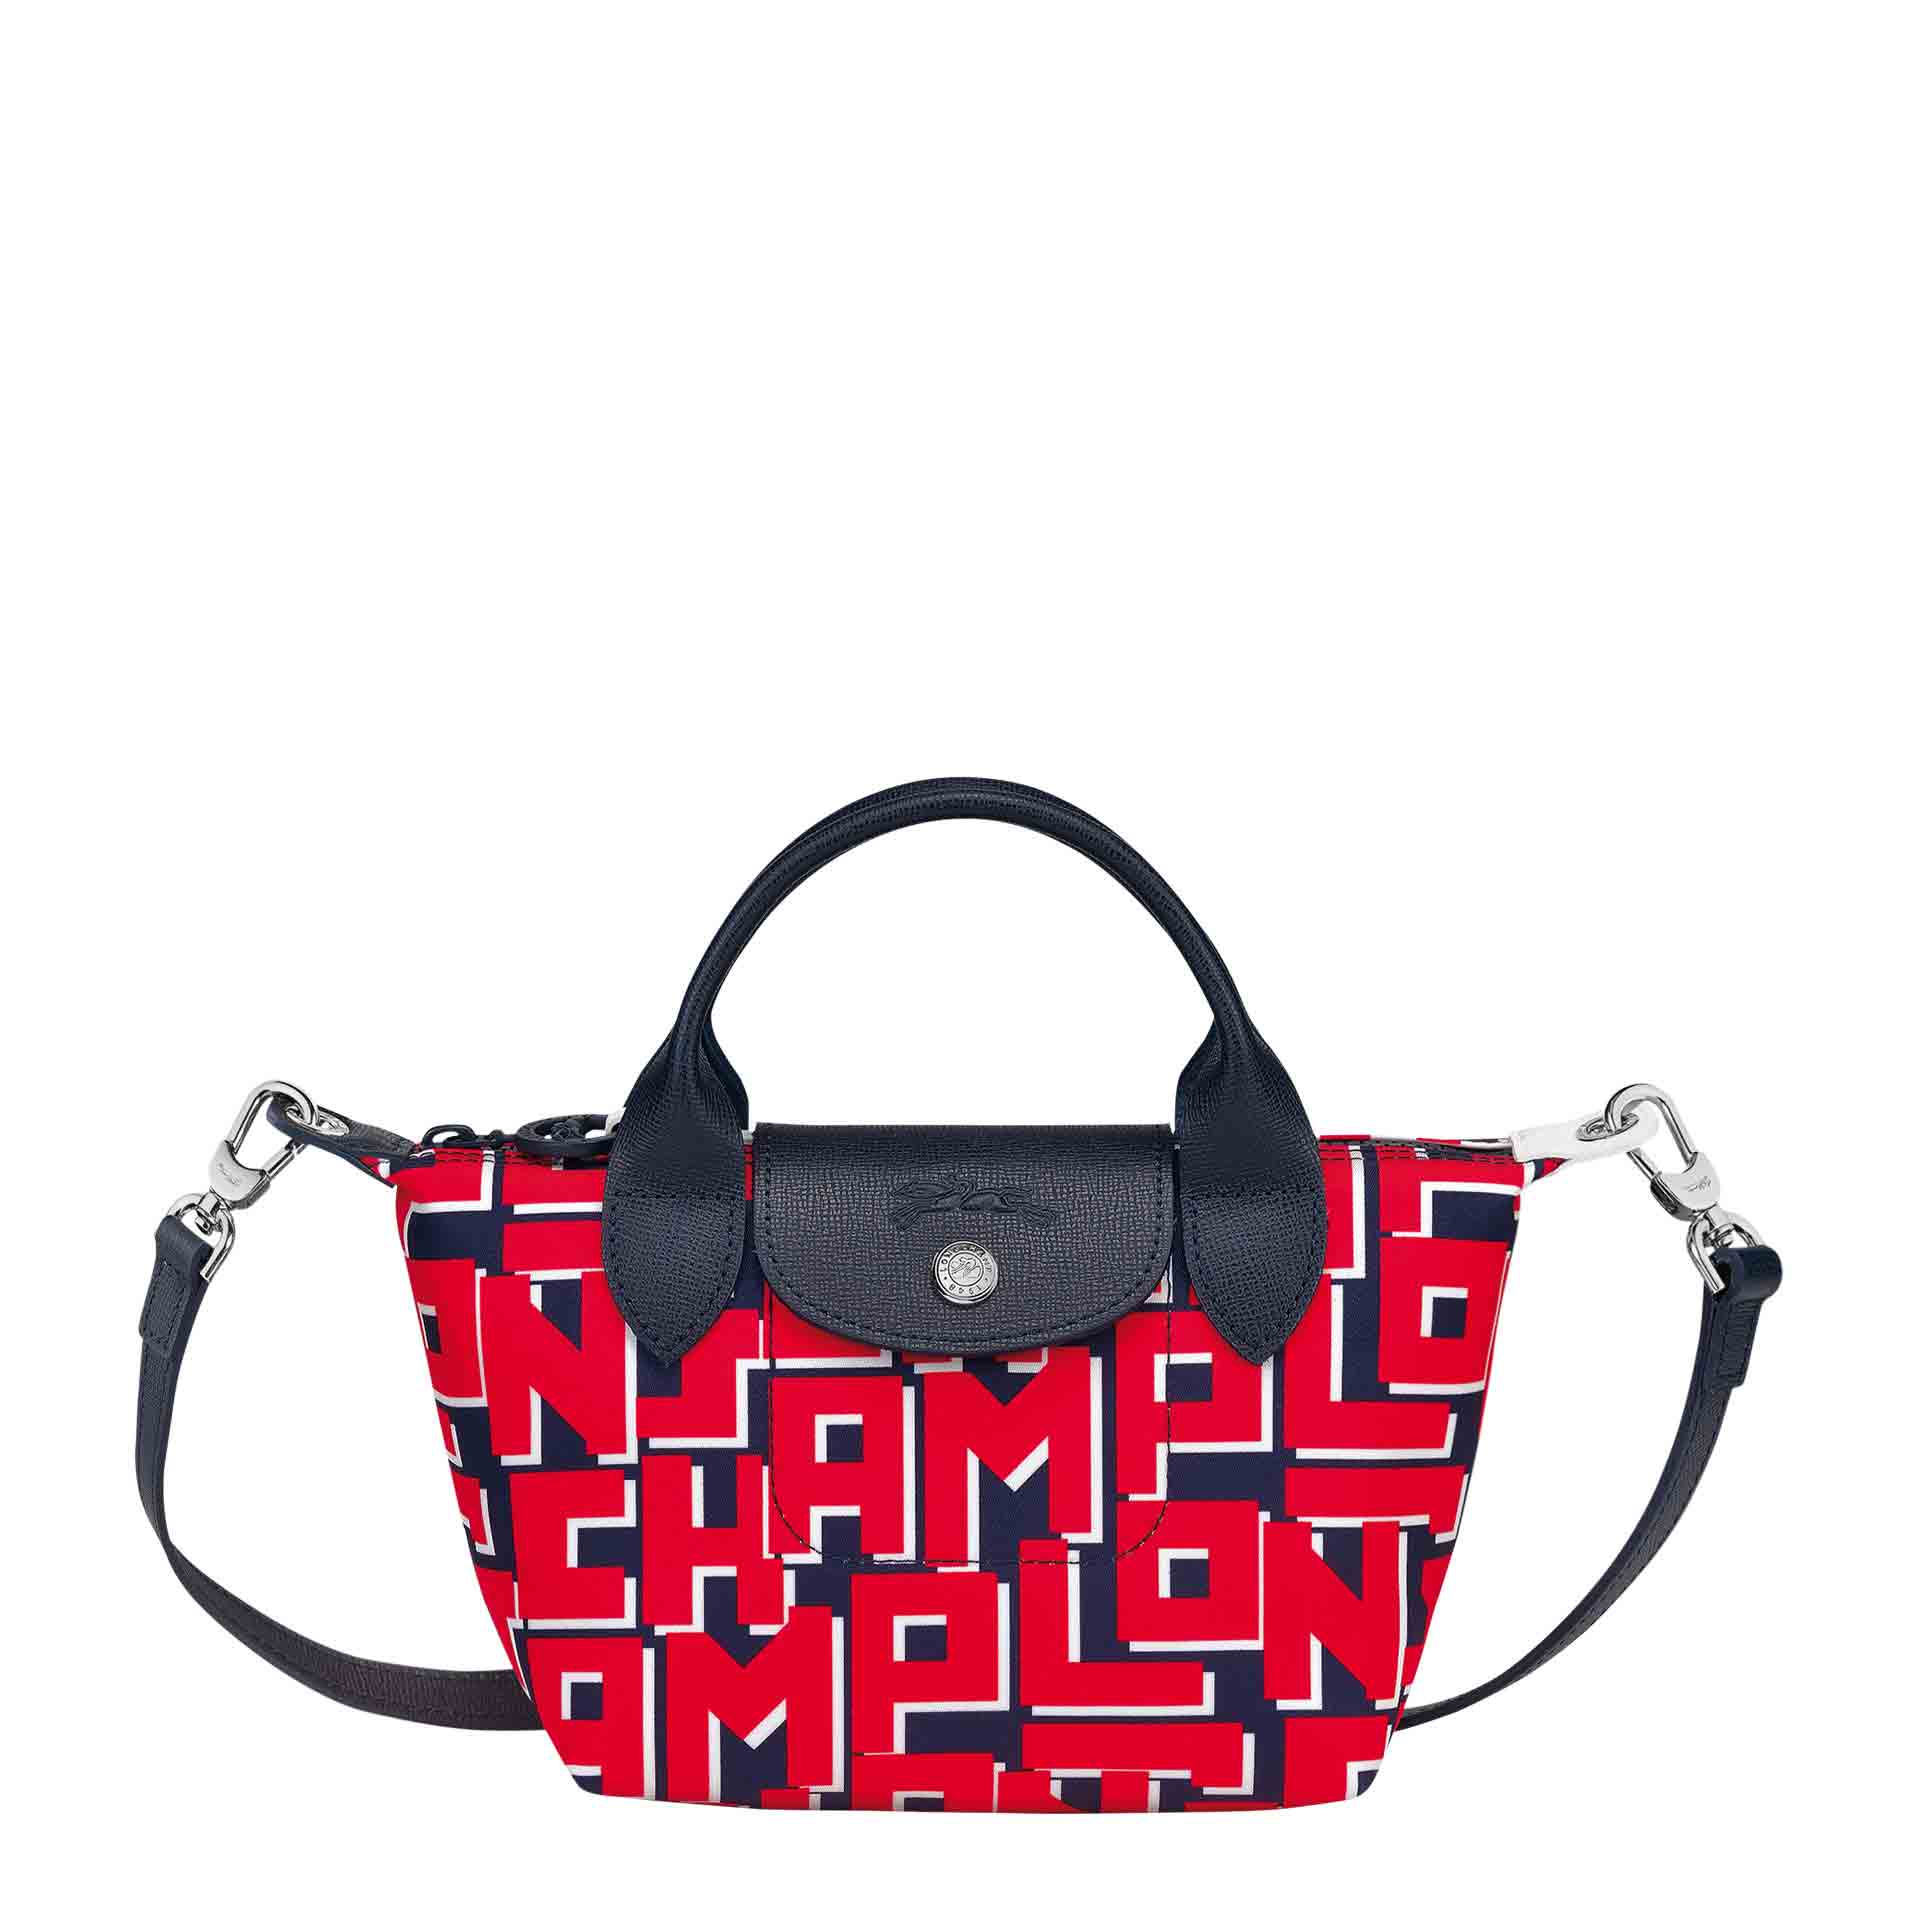 Longchamp Le Pliage Collection Handtasche XS navy red